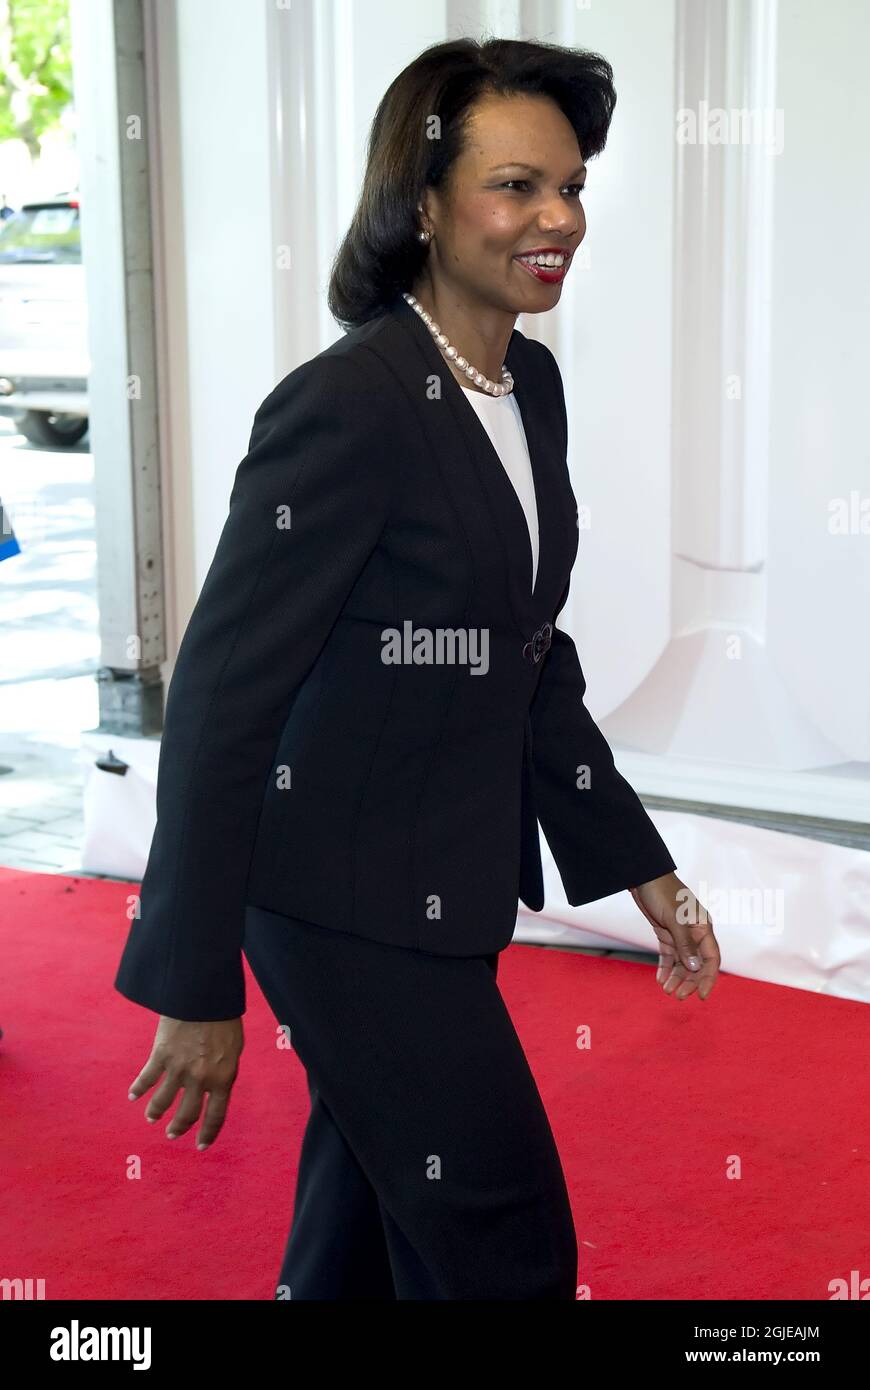 U.S. Secretary of State Condoleezza Rice arrives for the first annual review of the International Compact with Iraq in Stockholm. Stock Photo